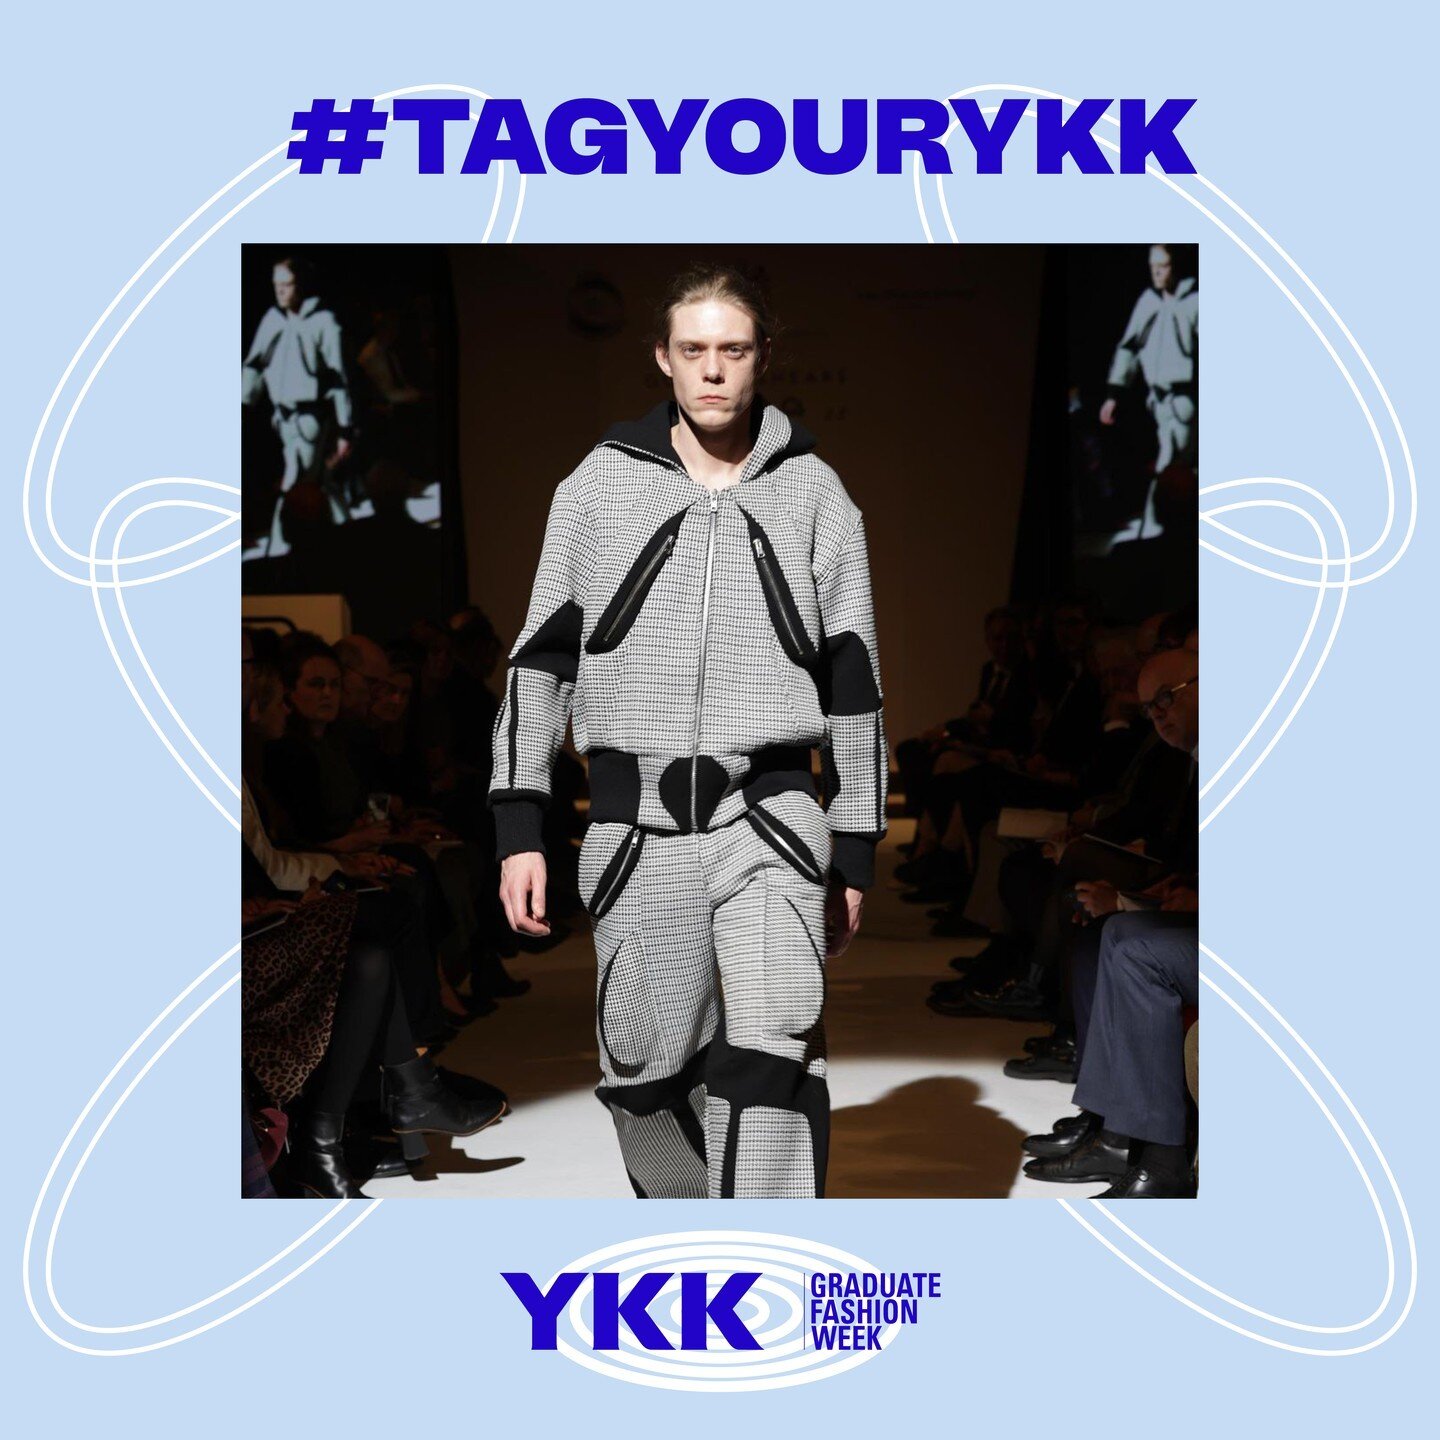 And our final #TagYourYKK winner this week is @urpaq__ 👏🎉

Thanks for tagging us in all your amazing work! Keep using our hashtags and tagging us to be featured on our stories and feed #️⃣

@leedsartsuniversity_fashion @ykklondonshowroom
#wearegrad